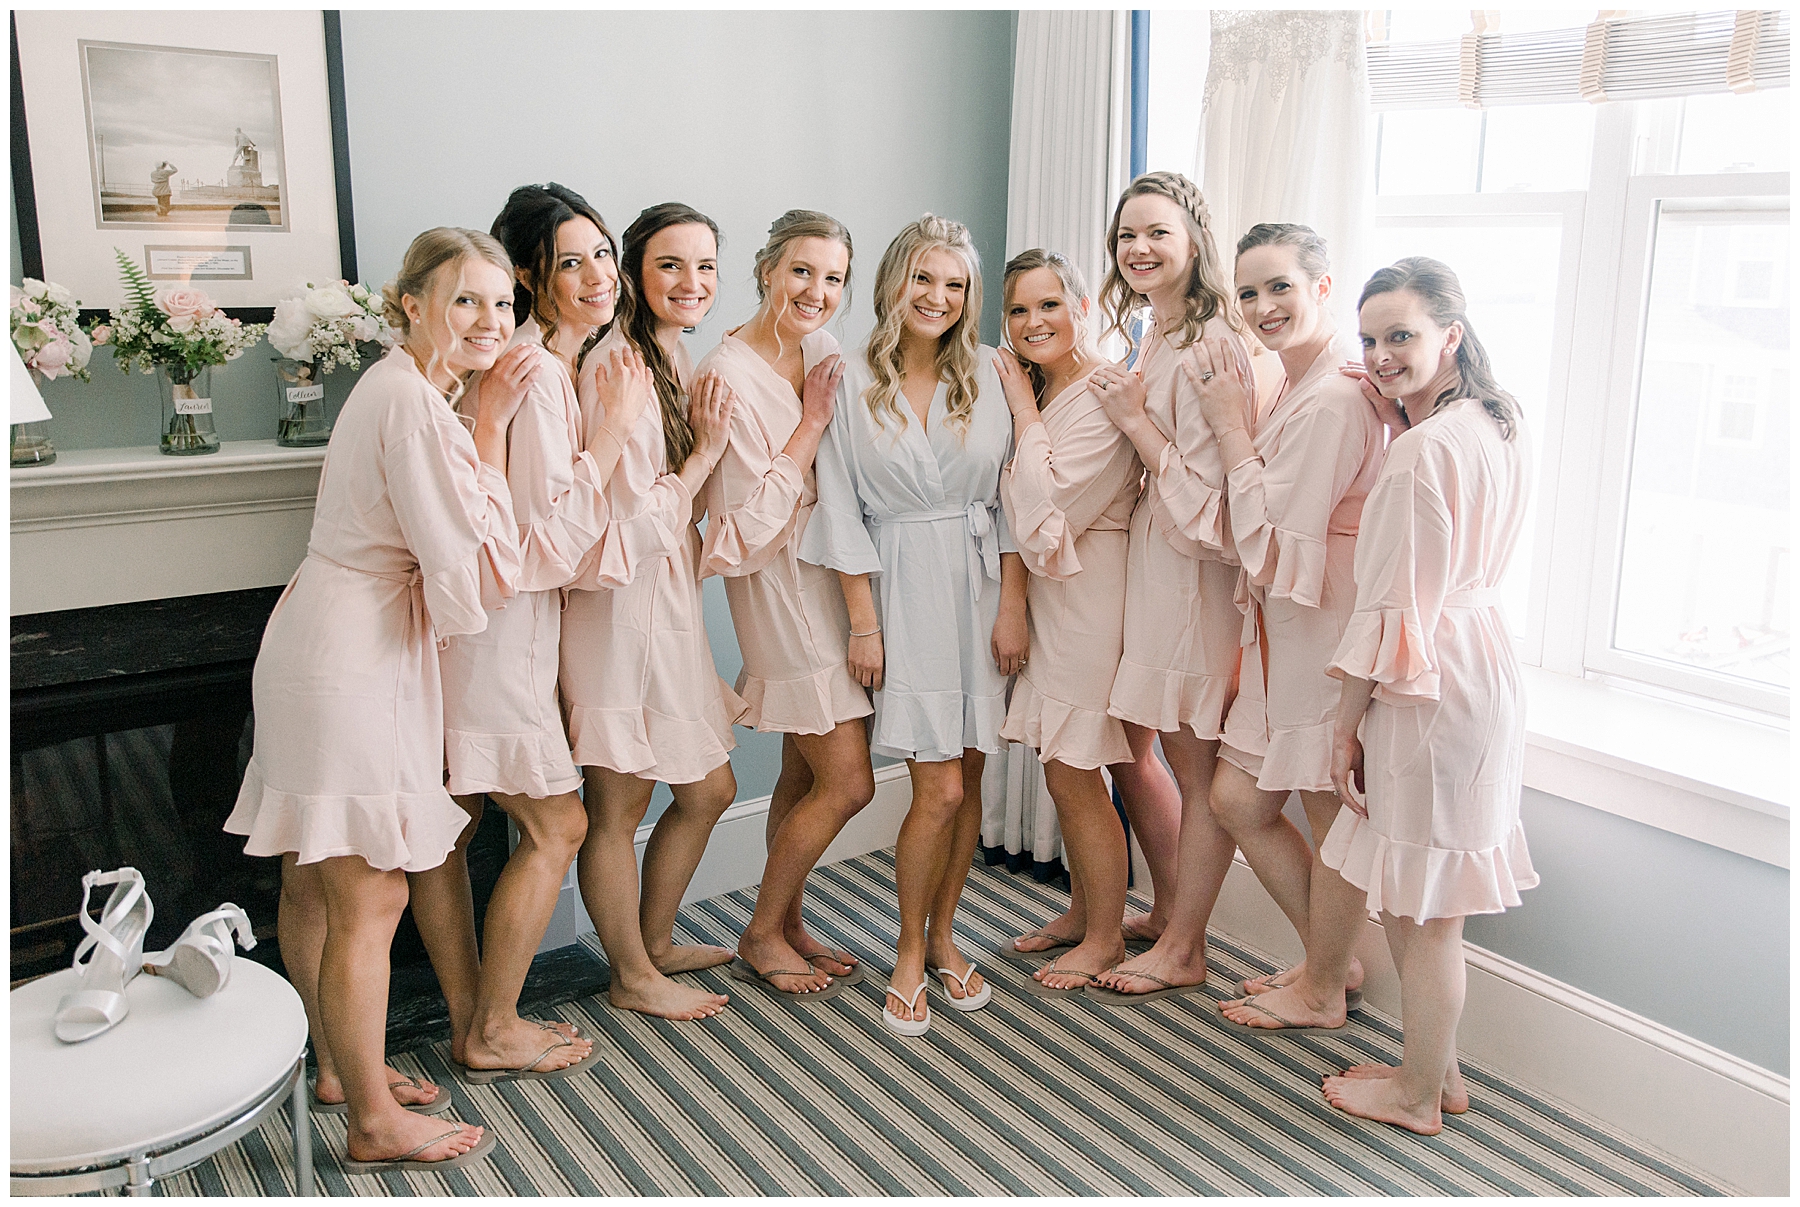 Bridal party gets ready for wedding at Beauport Hotel in Gloucester MA photographed by Stephanie Berenson